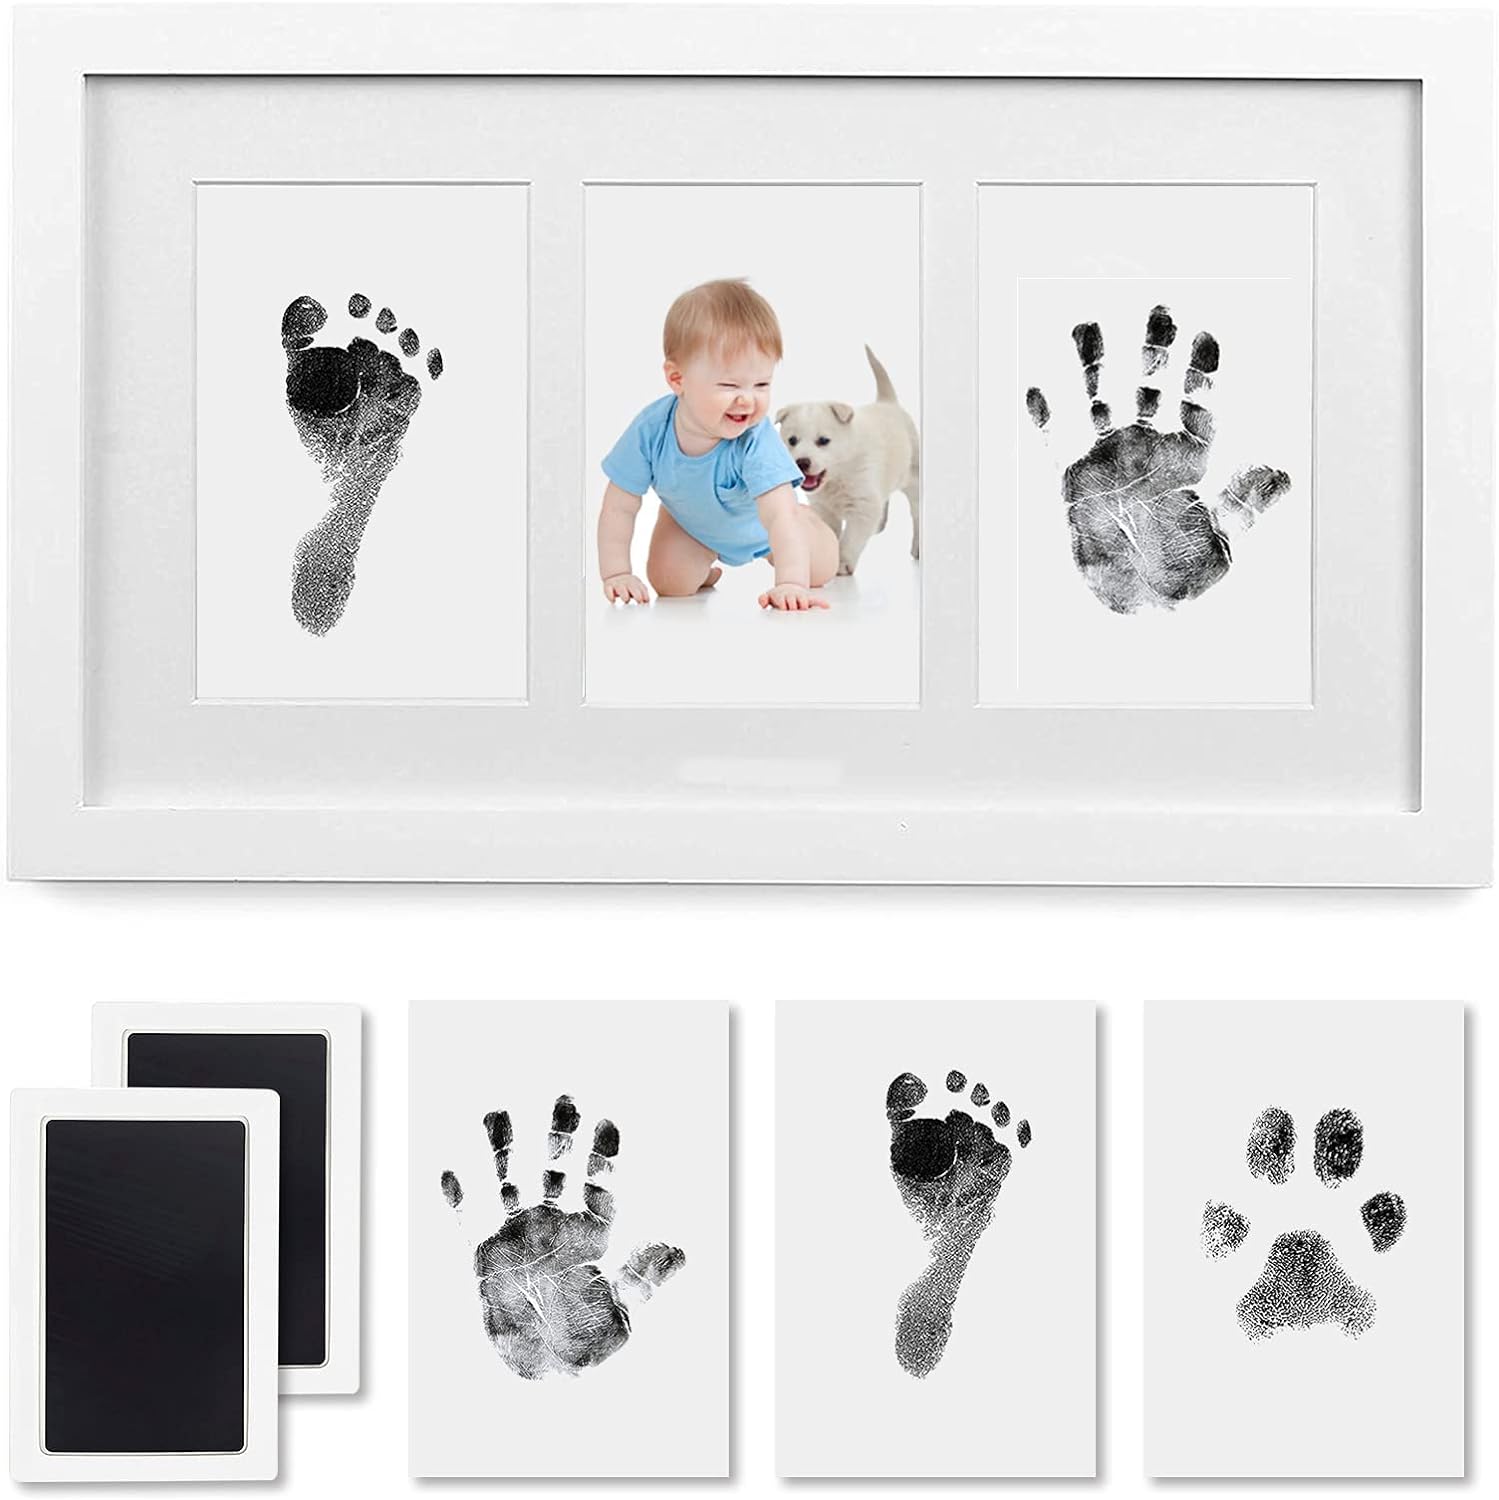 PewinGo Baby Handprint and Footprint Kit, Baby Framed Photo Kit with 100% Clean-Touch Ink Pad for Newborn Baby, Perfect baby gift,white,36*21*3.5 cm